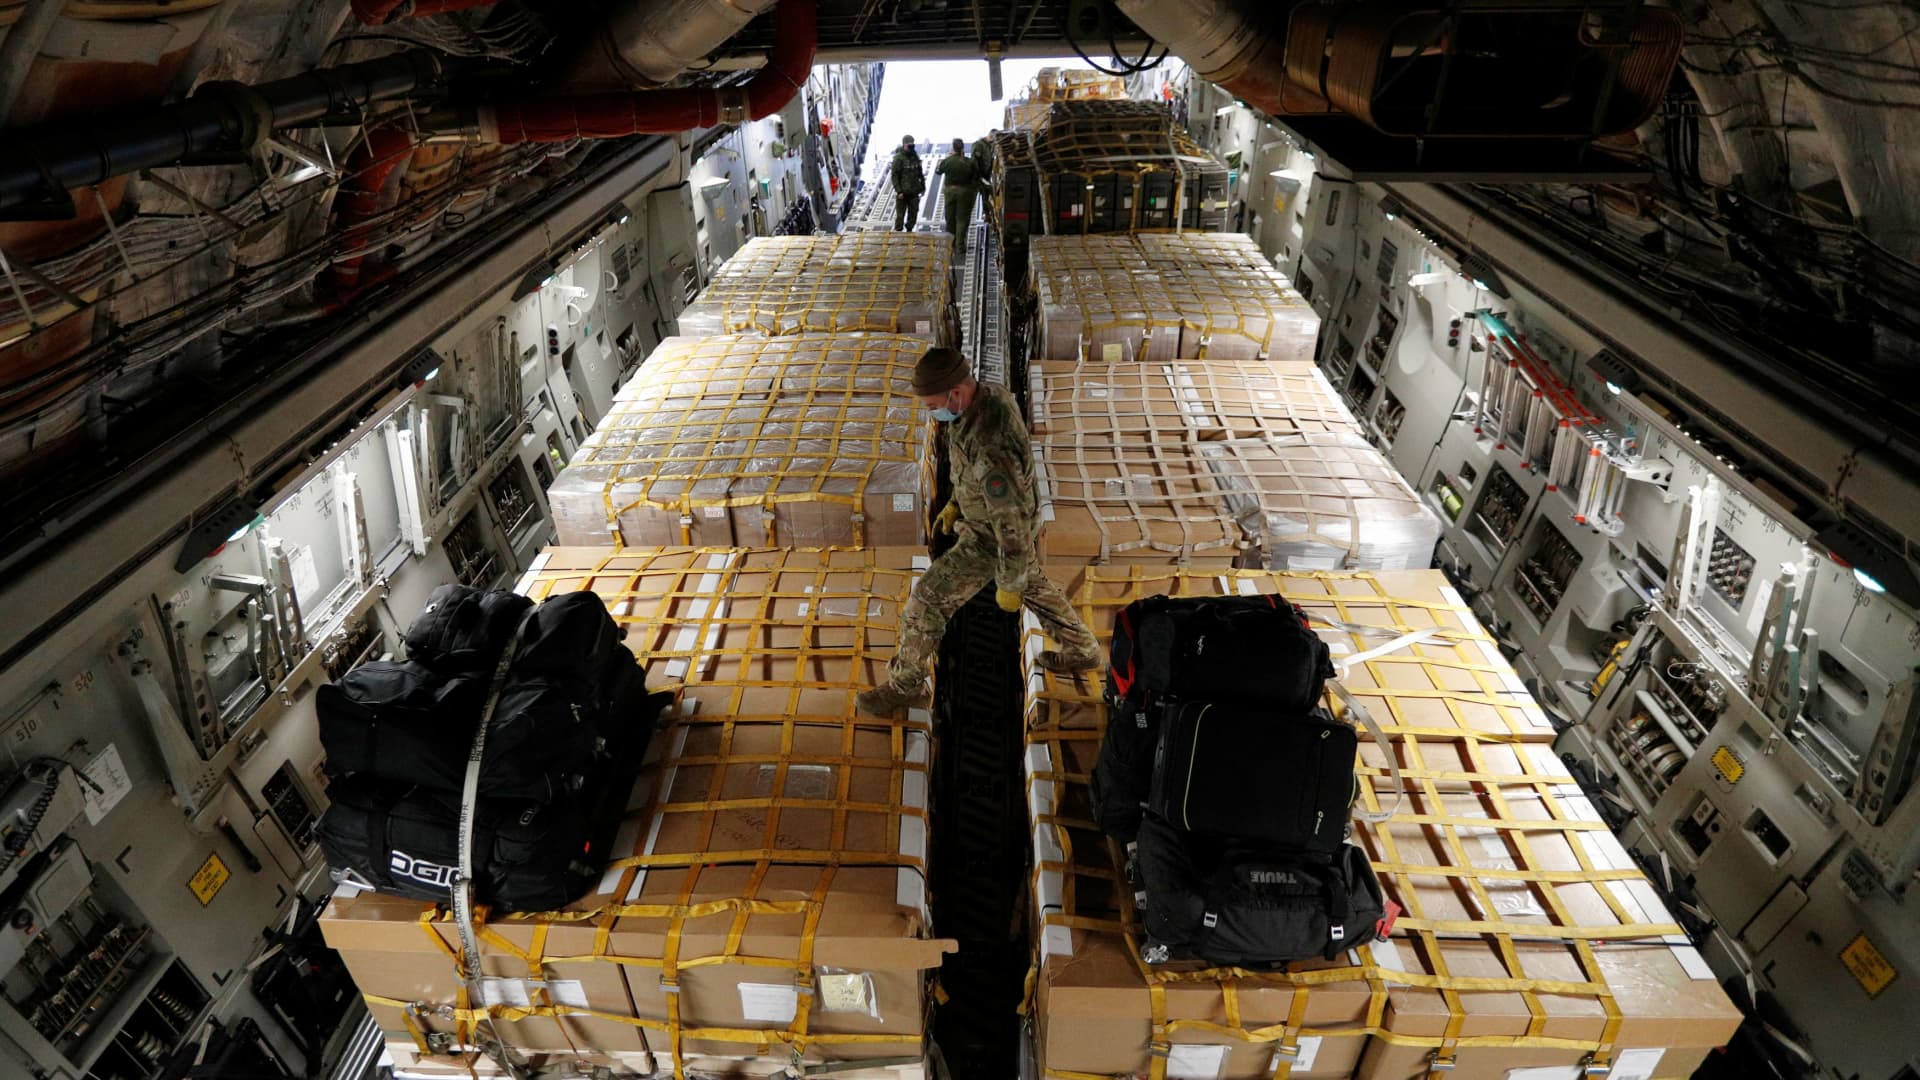 Canadian Forces personnel load lethal and non-lethal aid to be sent to Ukraine, on a transport aircraft bound for Poland, following Russia's invasion of Ukraine, at CFB Trenton in Trenton, Ontario, Canada, March 7, 2022.